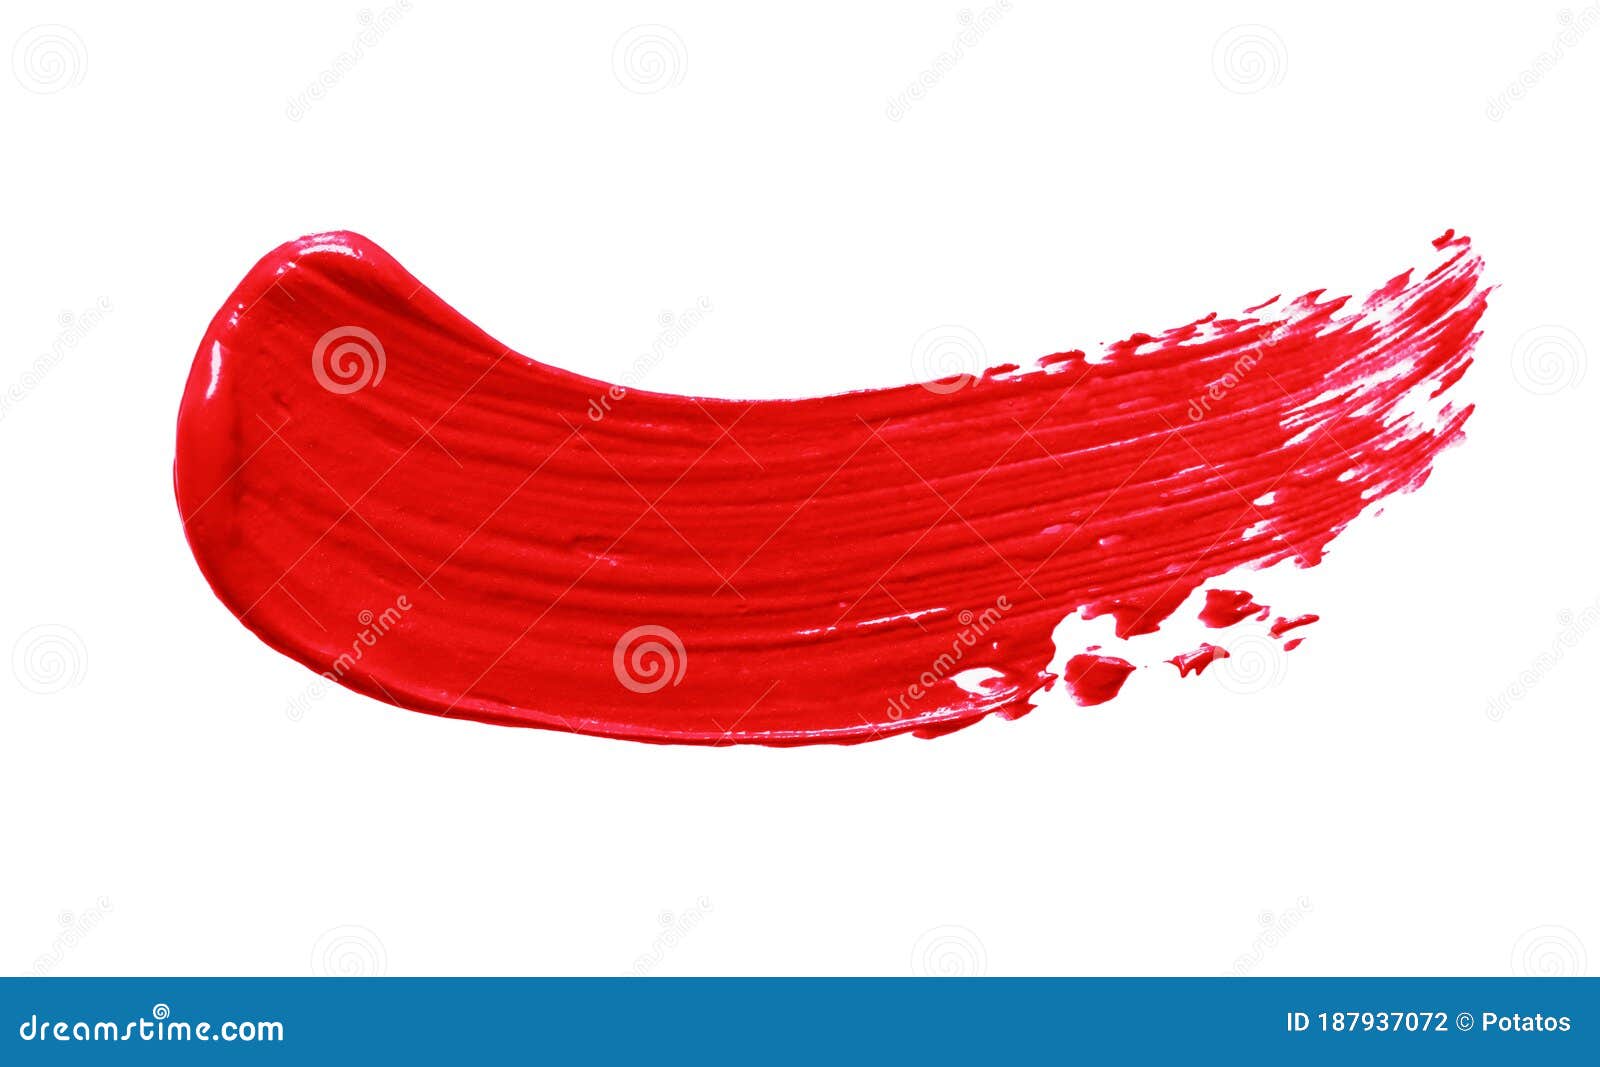 red lipstick stroke smudge smear  on white background. bright color cream make-up swatch cut out